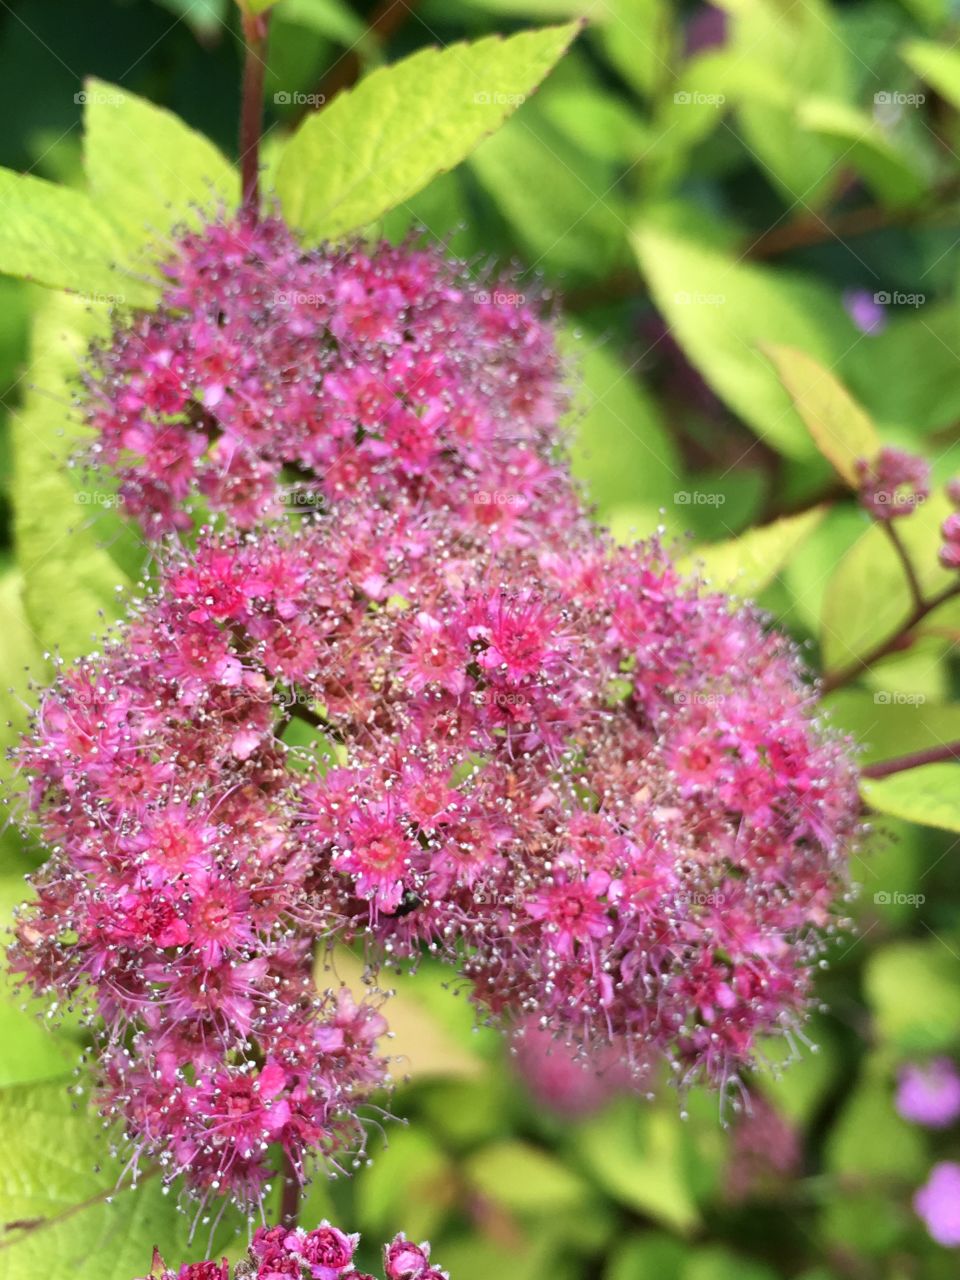 Close up view of Spiraea pink flowers against lime green foliage on the shrub in the garden in summer